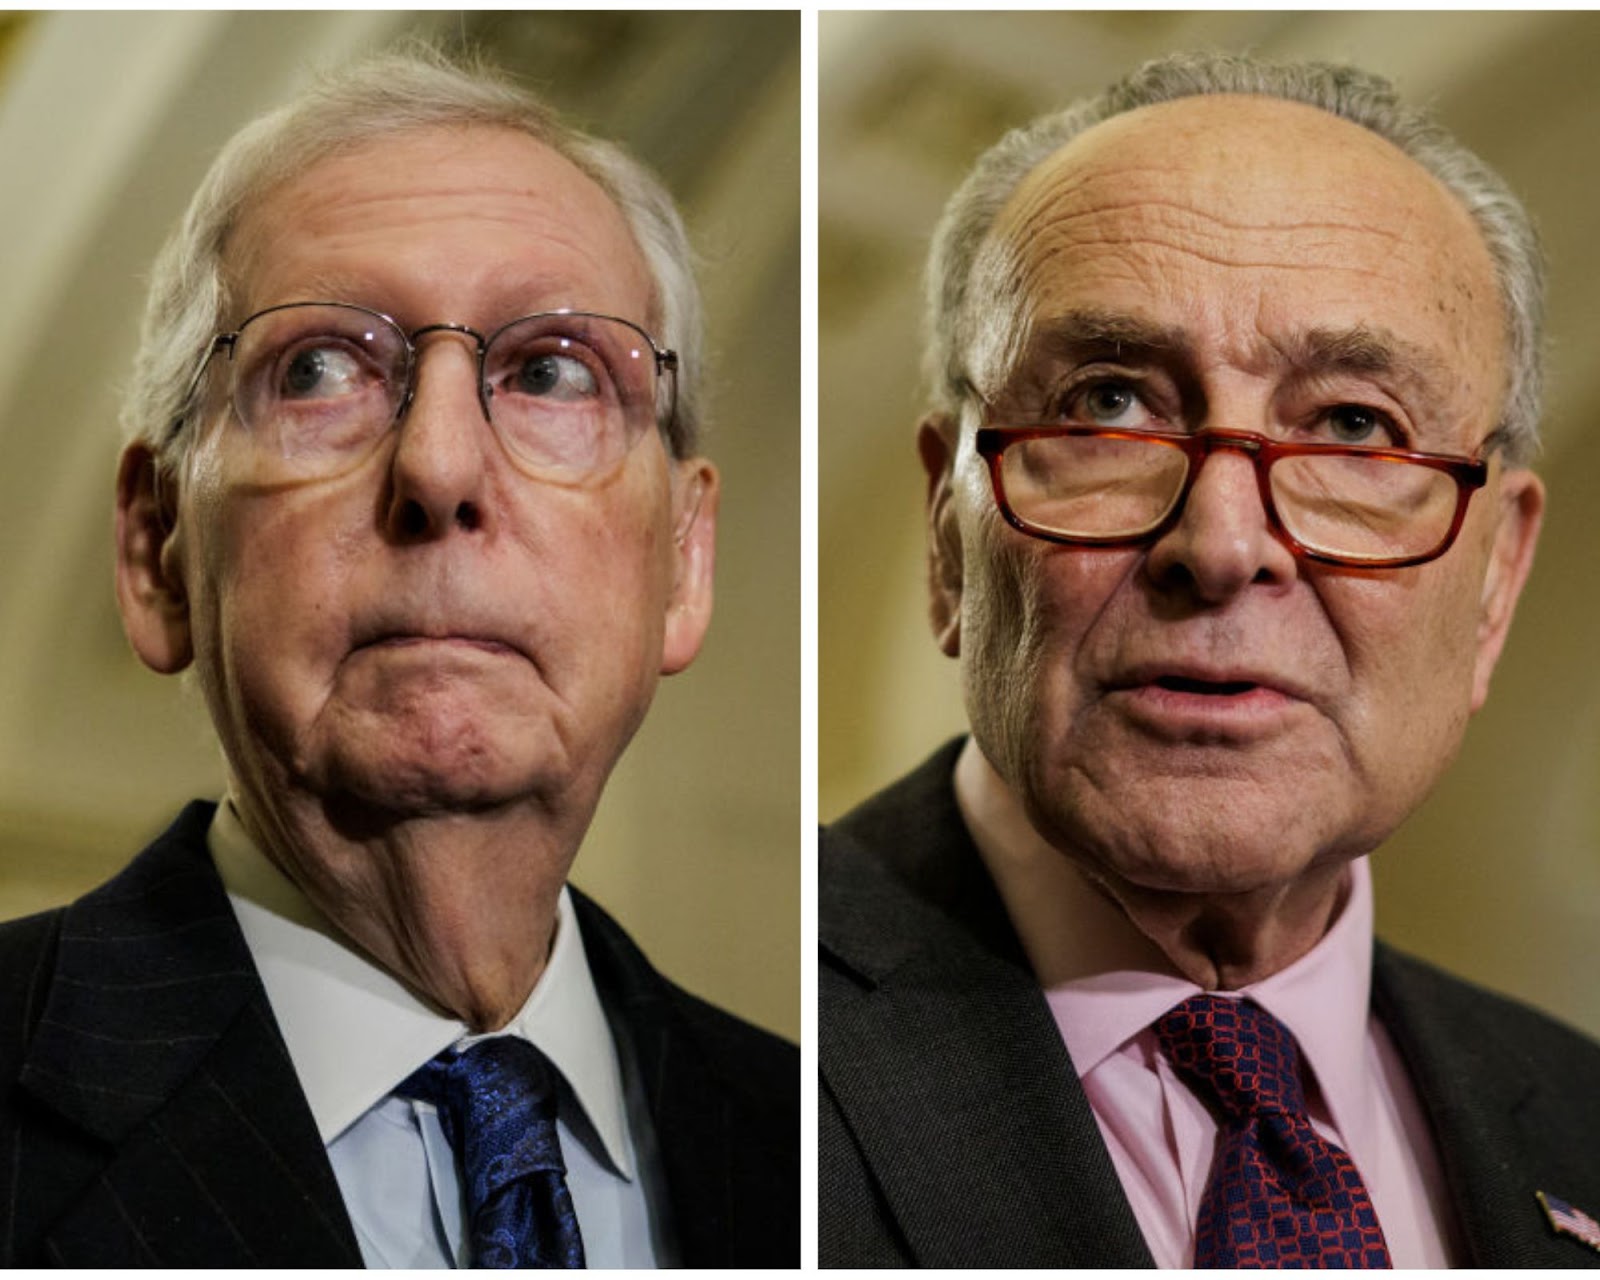 Sens. Schumer and McConnell